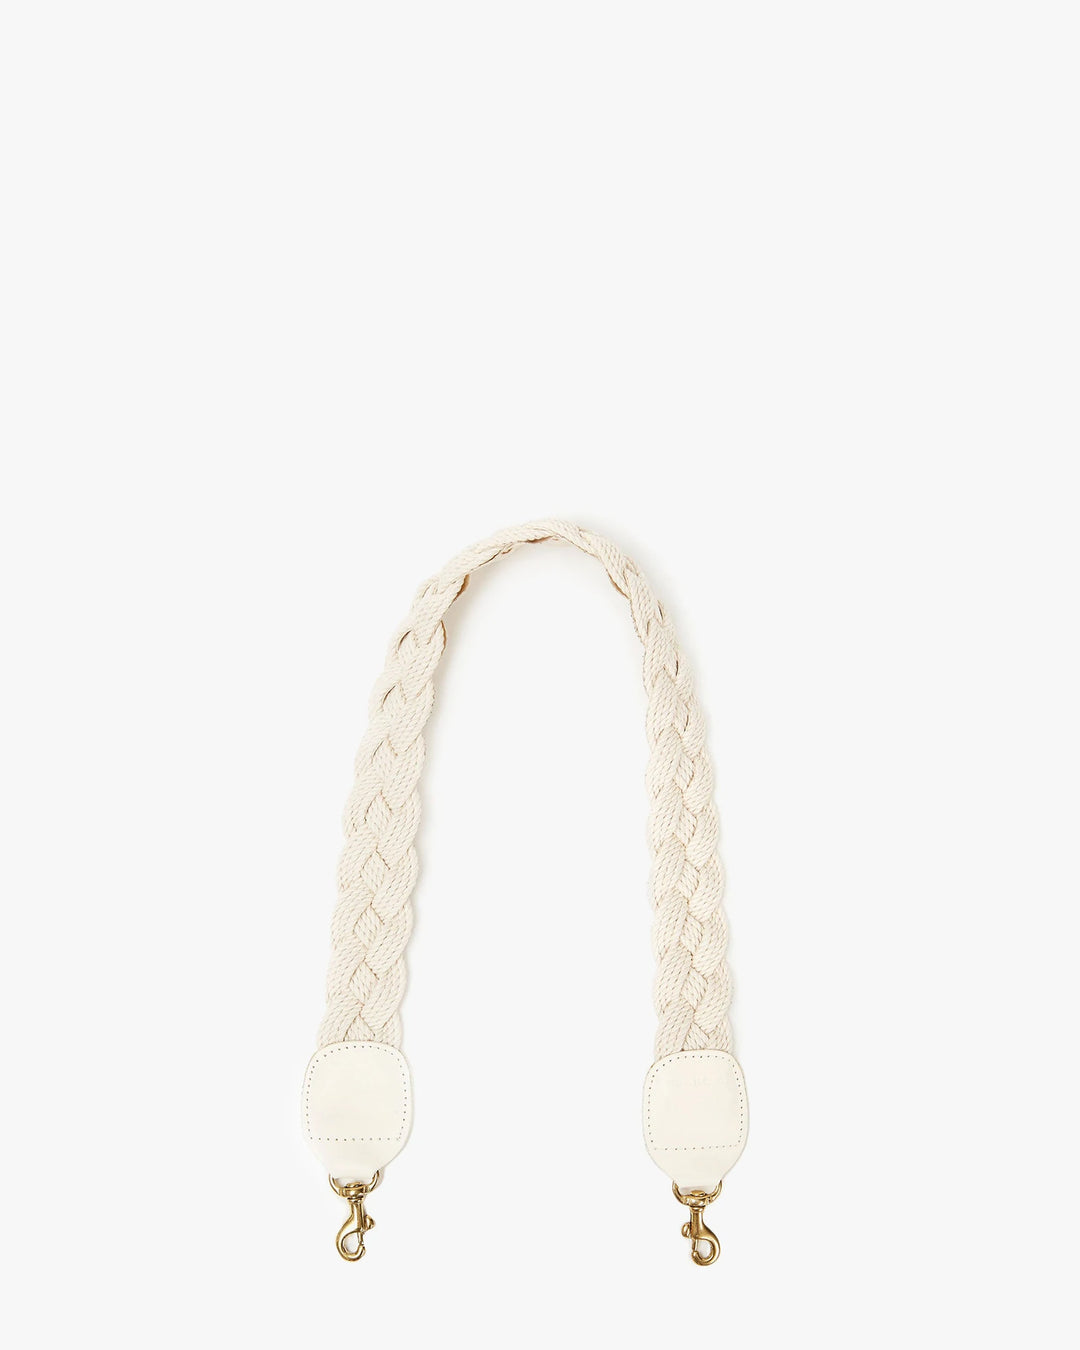 Clare V. - Shoulder Strap in Cream Braided Rope